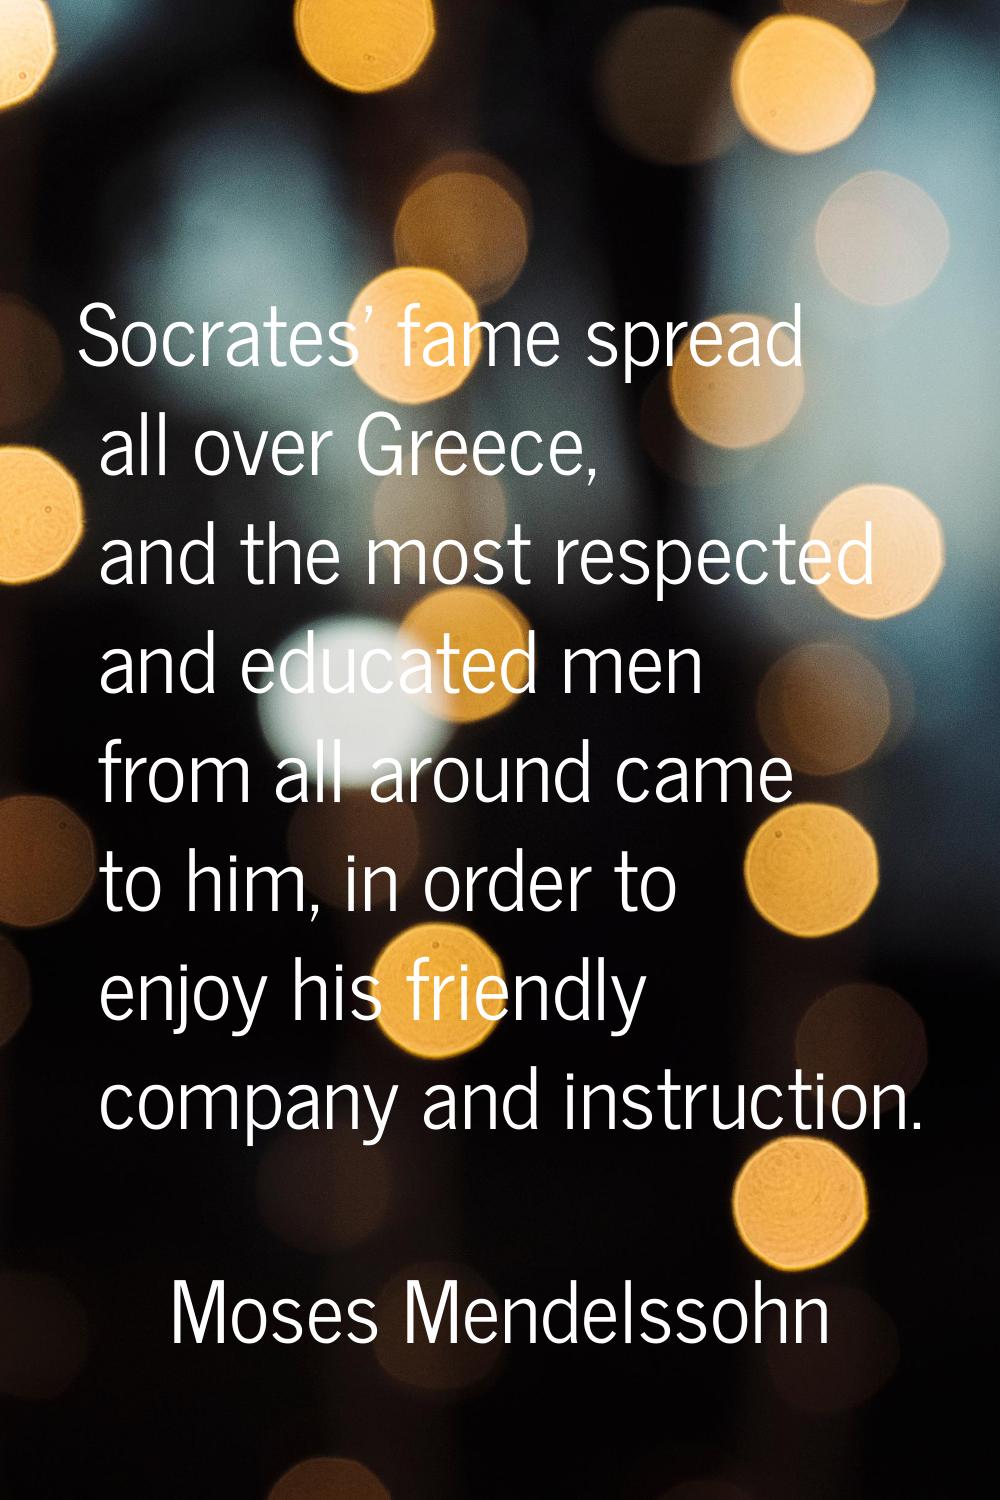 Socrates' fame spread all over Greece, and the most respected and educated men from all around came